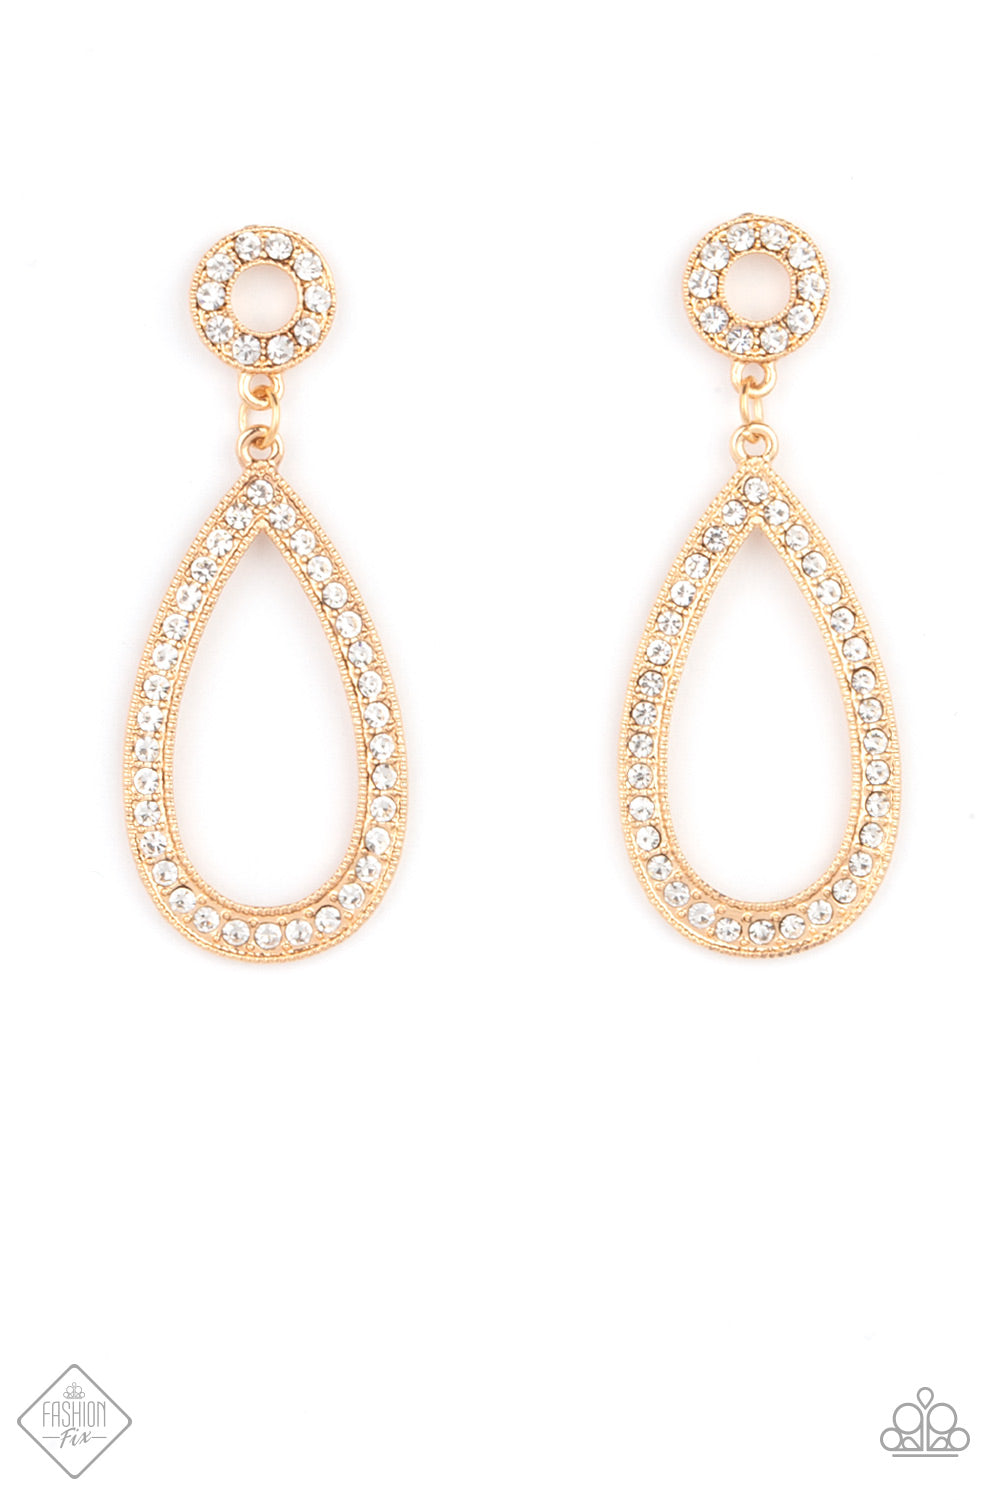 Paparazzi Regal Revival - Gold Fashion Fix Earrings - A Finishing Touch Jewelry